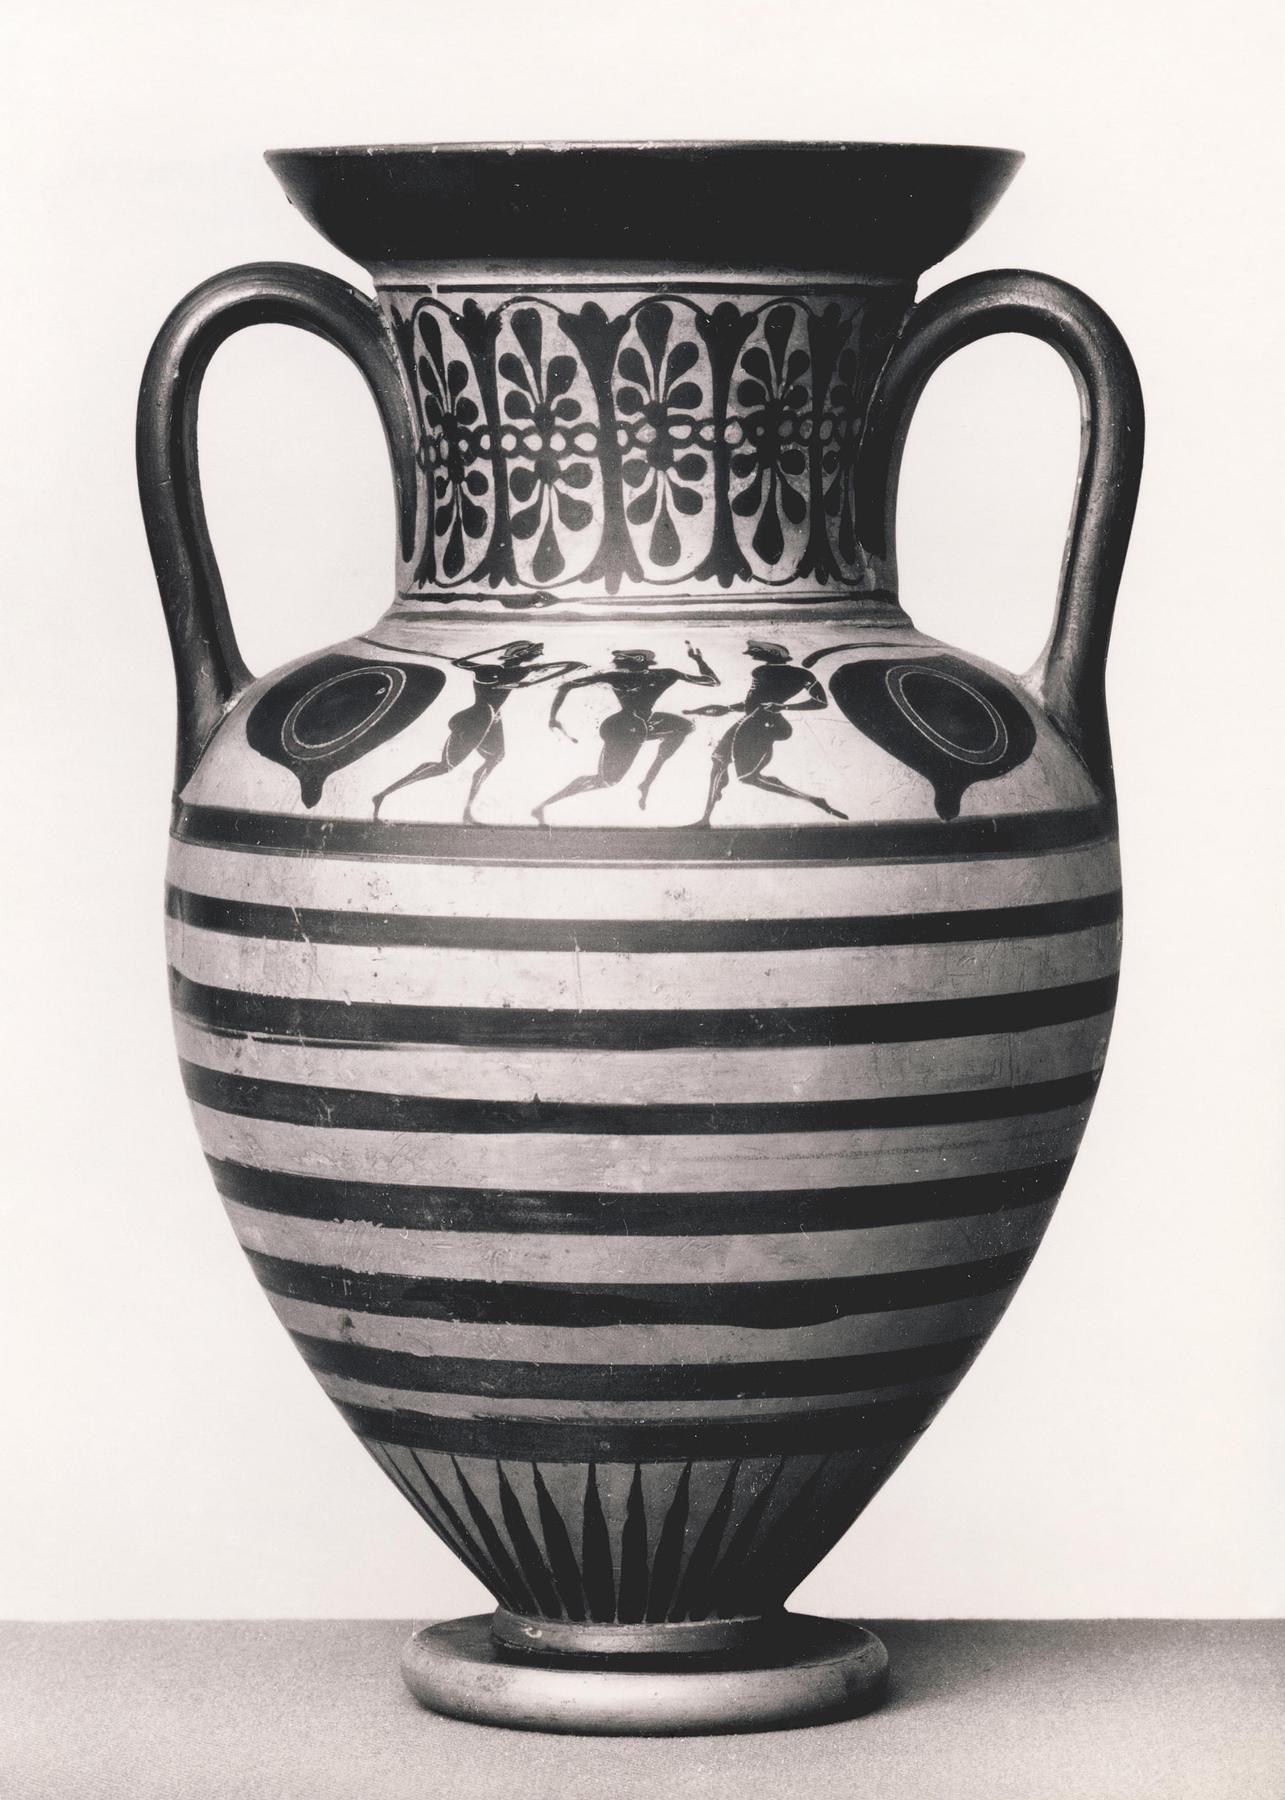 Amphora with dancing youths (komos scene), H577